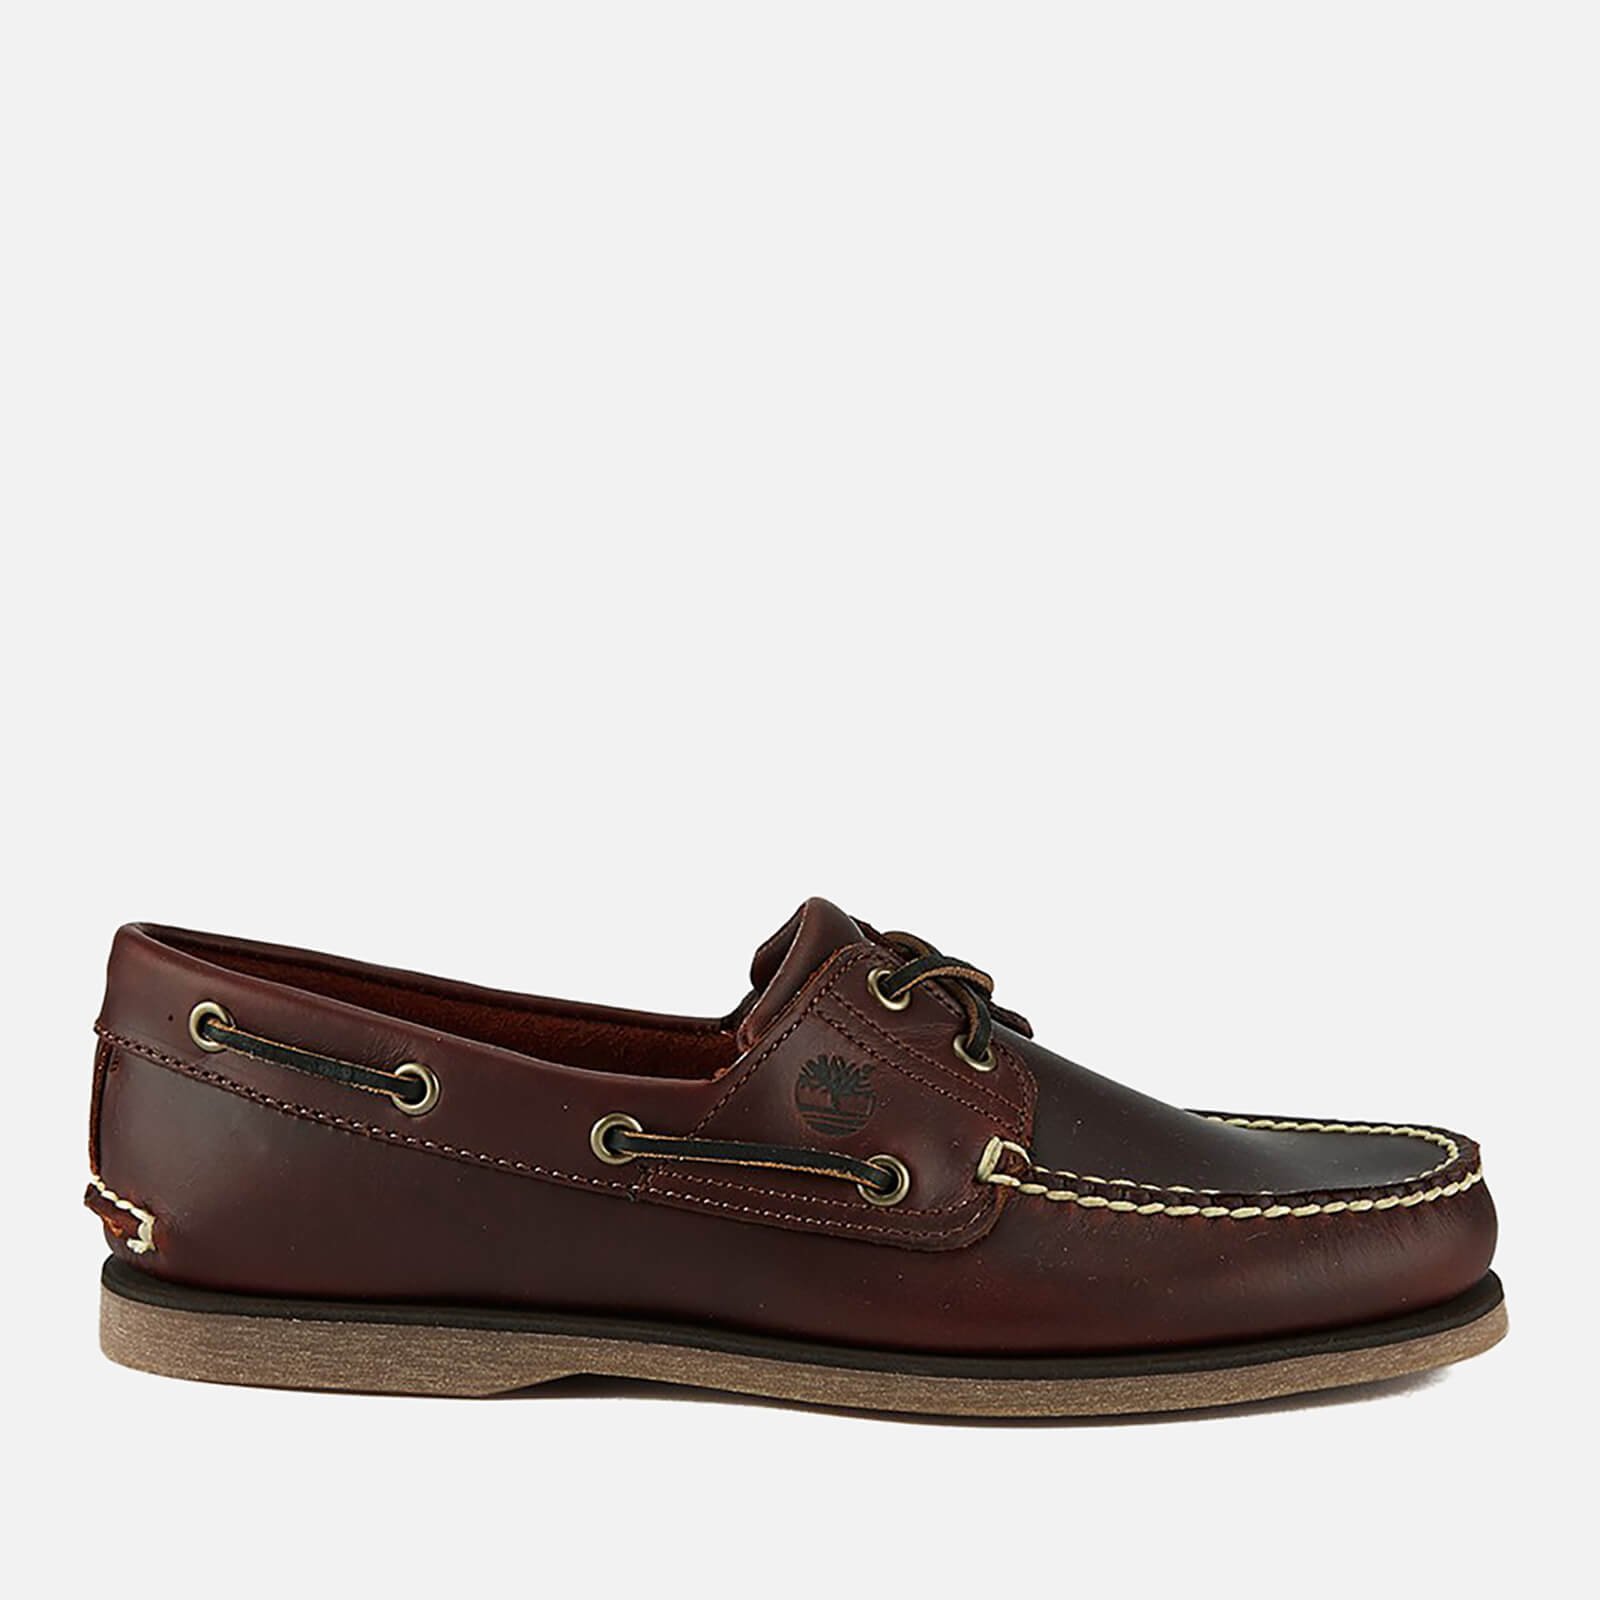 Men's Classic 2-Eye Boat Shoes - Rootbeer Smooth - UK 7